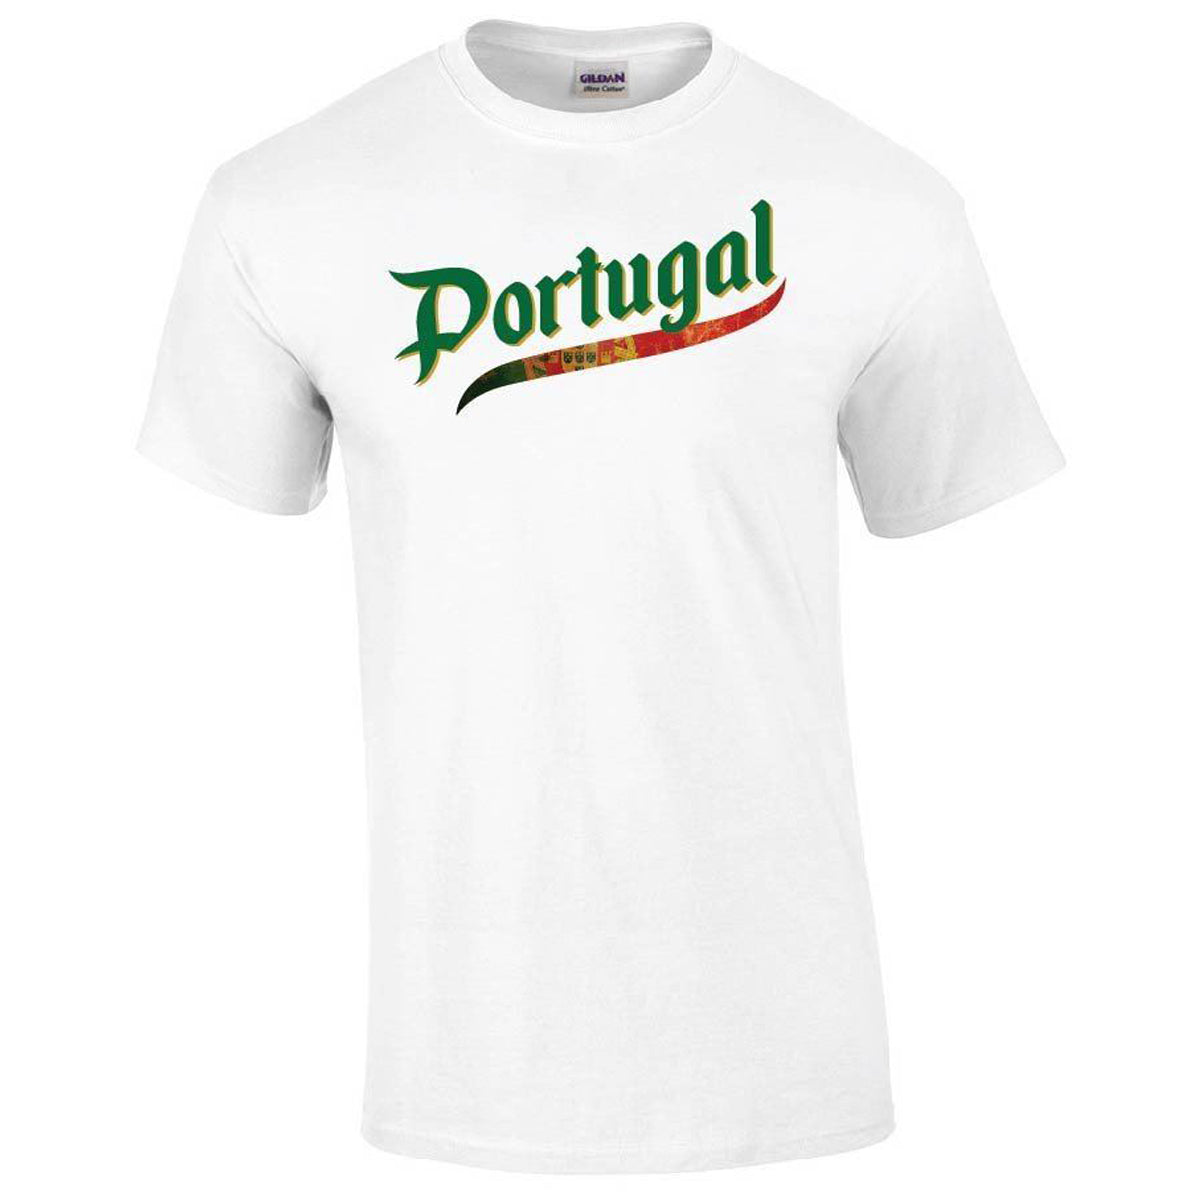 Portugal Script World Cup 2022 Printed Tee T-shirts 411 Youth Medium White Youth